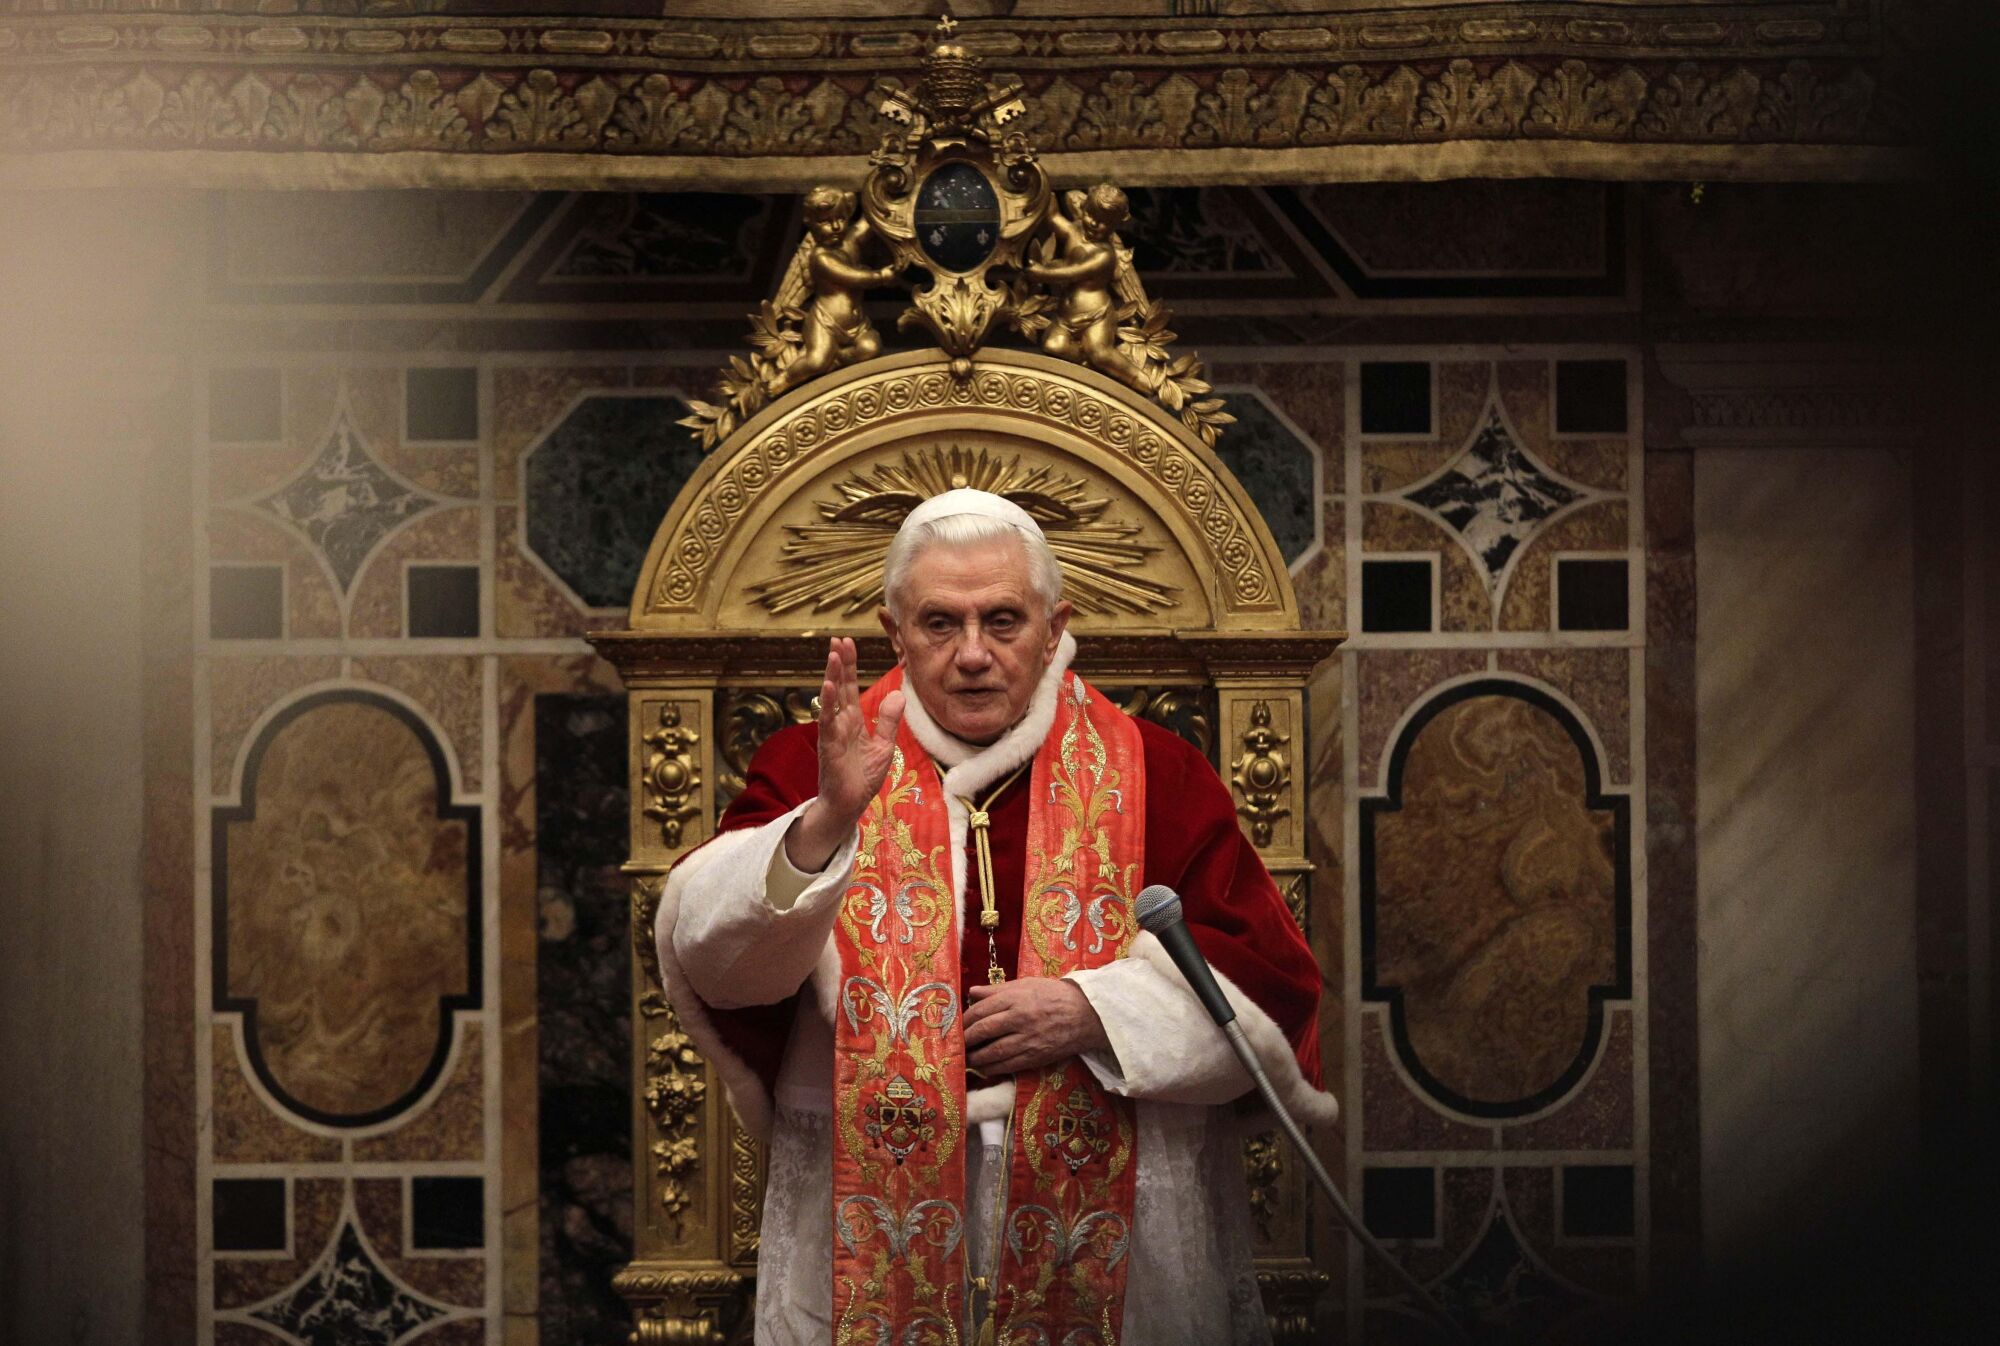 Pope Benedict XVI gives his blessing in red and white robes.